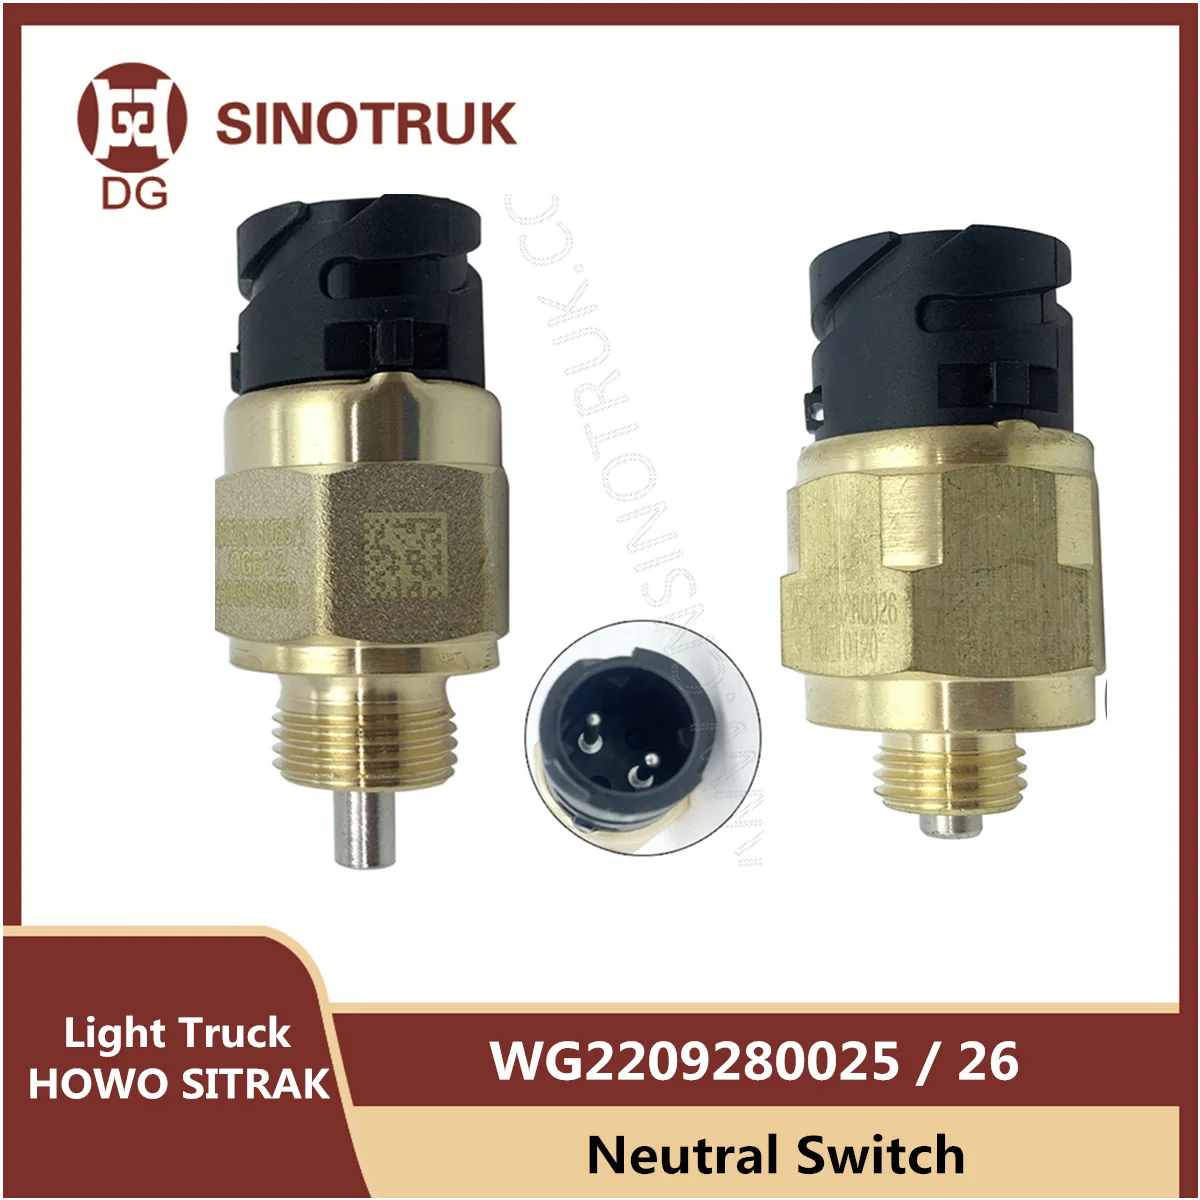 

Neutral Switch WG2209280025 Normally Closed For SIONTRUK HOWO Light Truck Hohan SITRAK Gearbox Pressure Switch WG2209280026 Open